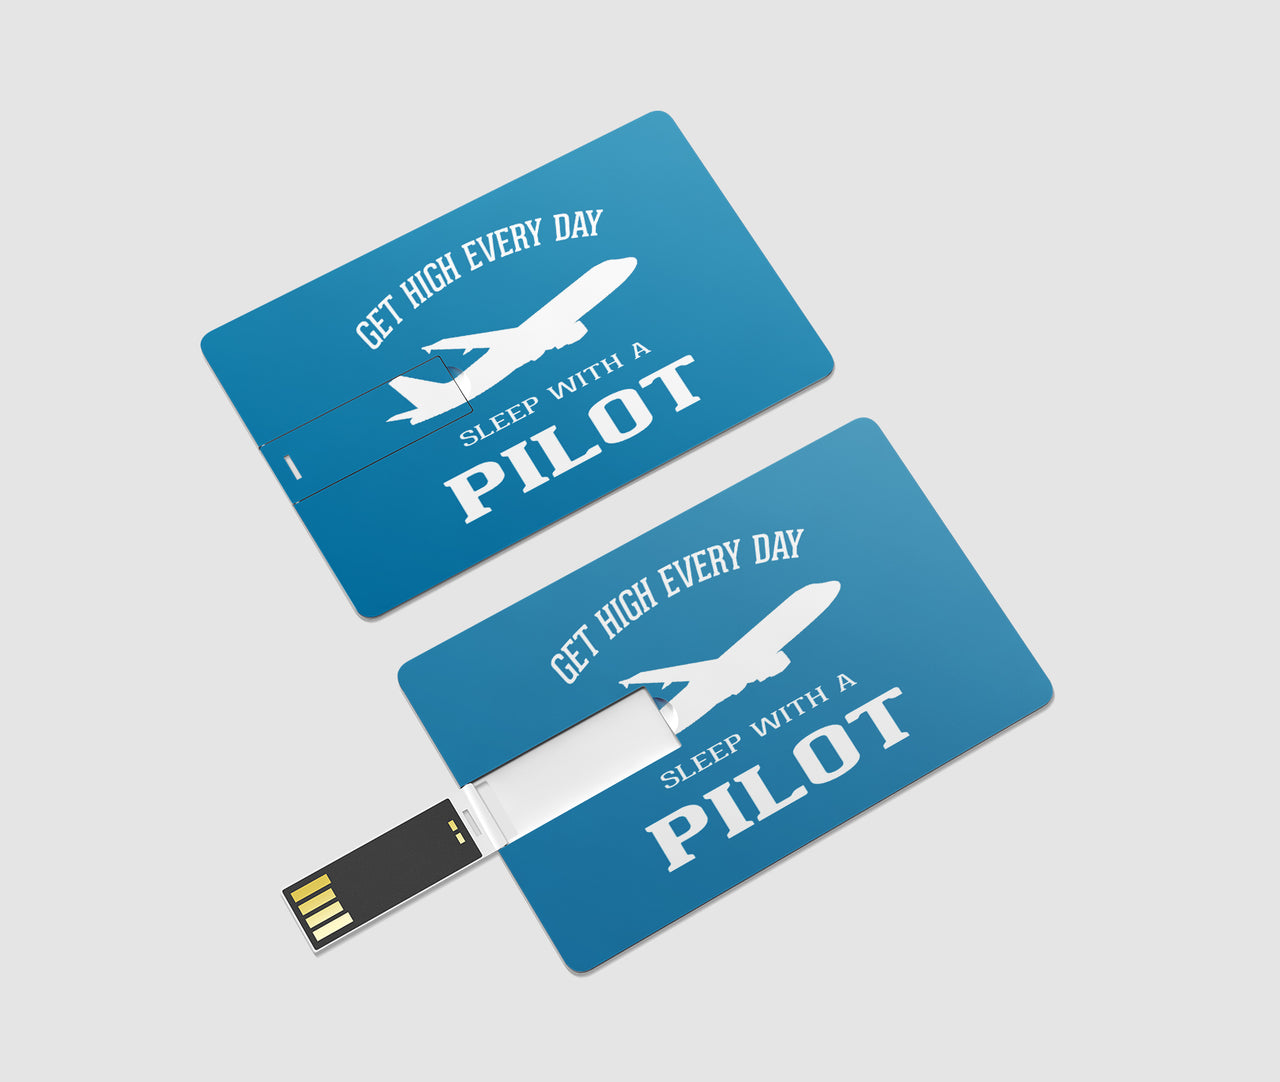 Get High Every Day Sleep With A Pilot Designed USB Cards